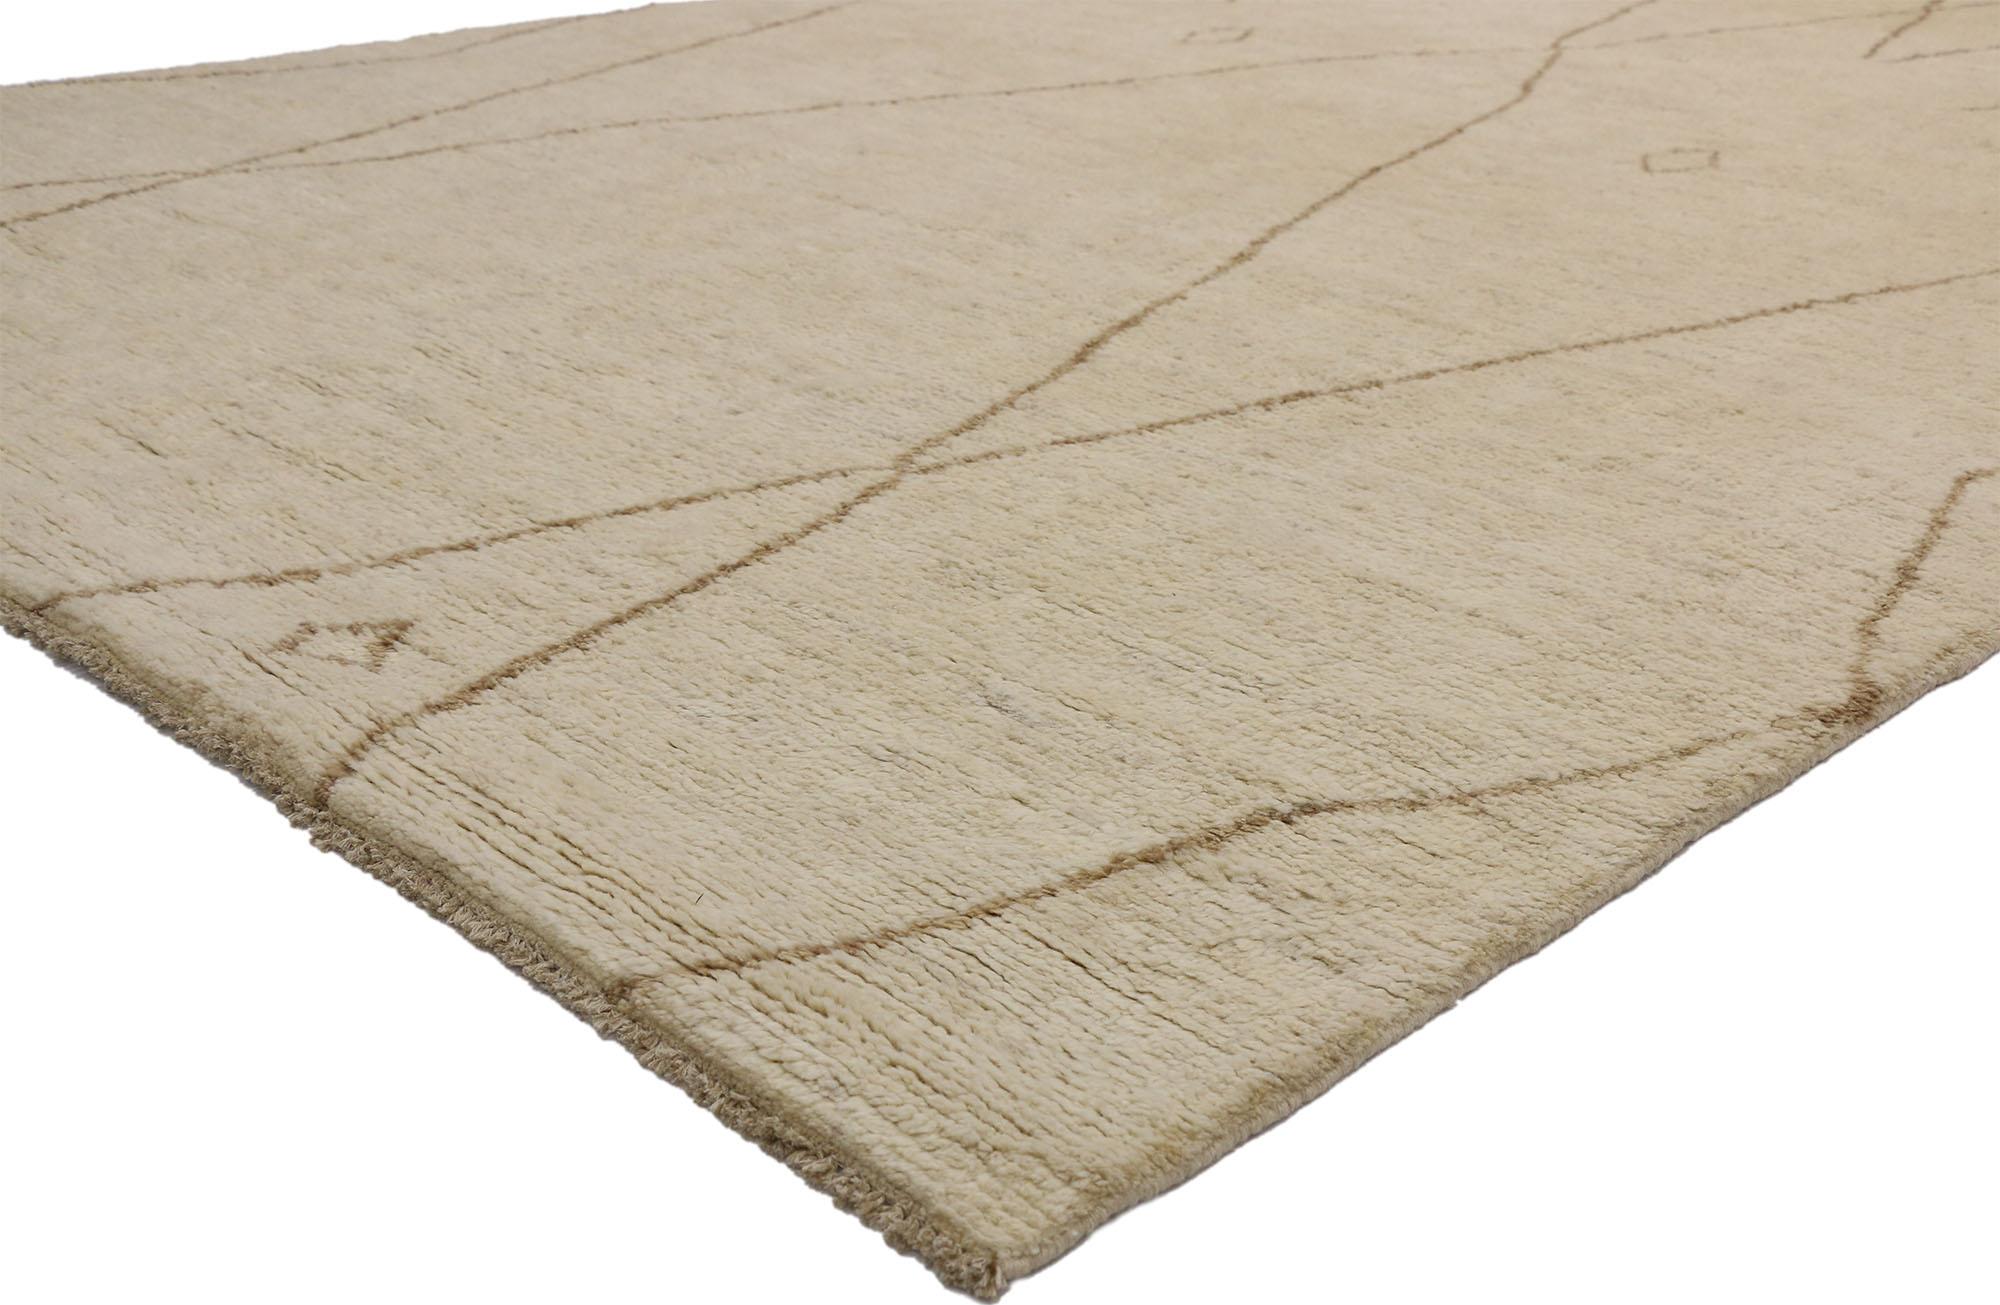 80463 New Contemporary Moroccan Area Rug with Nomadic and Minimalist Style 09'04 x 16'01. This hand knotted wool contemporary Moroccan area rug features contrasting camel-ecru lines running the length of the sandy-beige backdrop. The warm brown